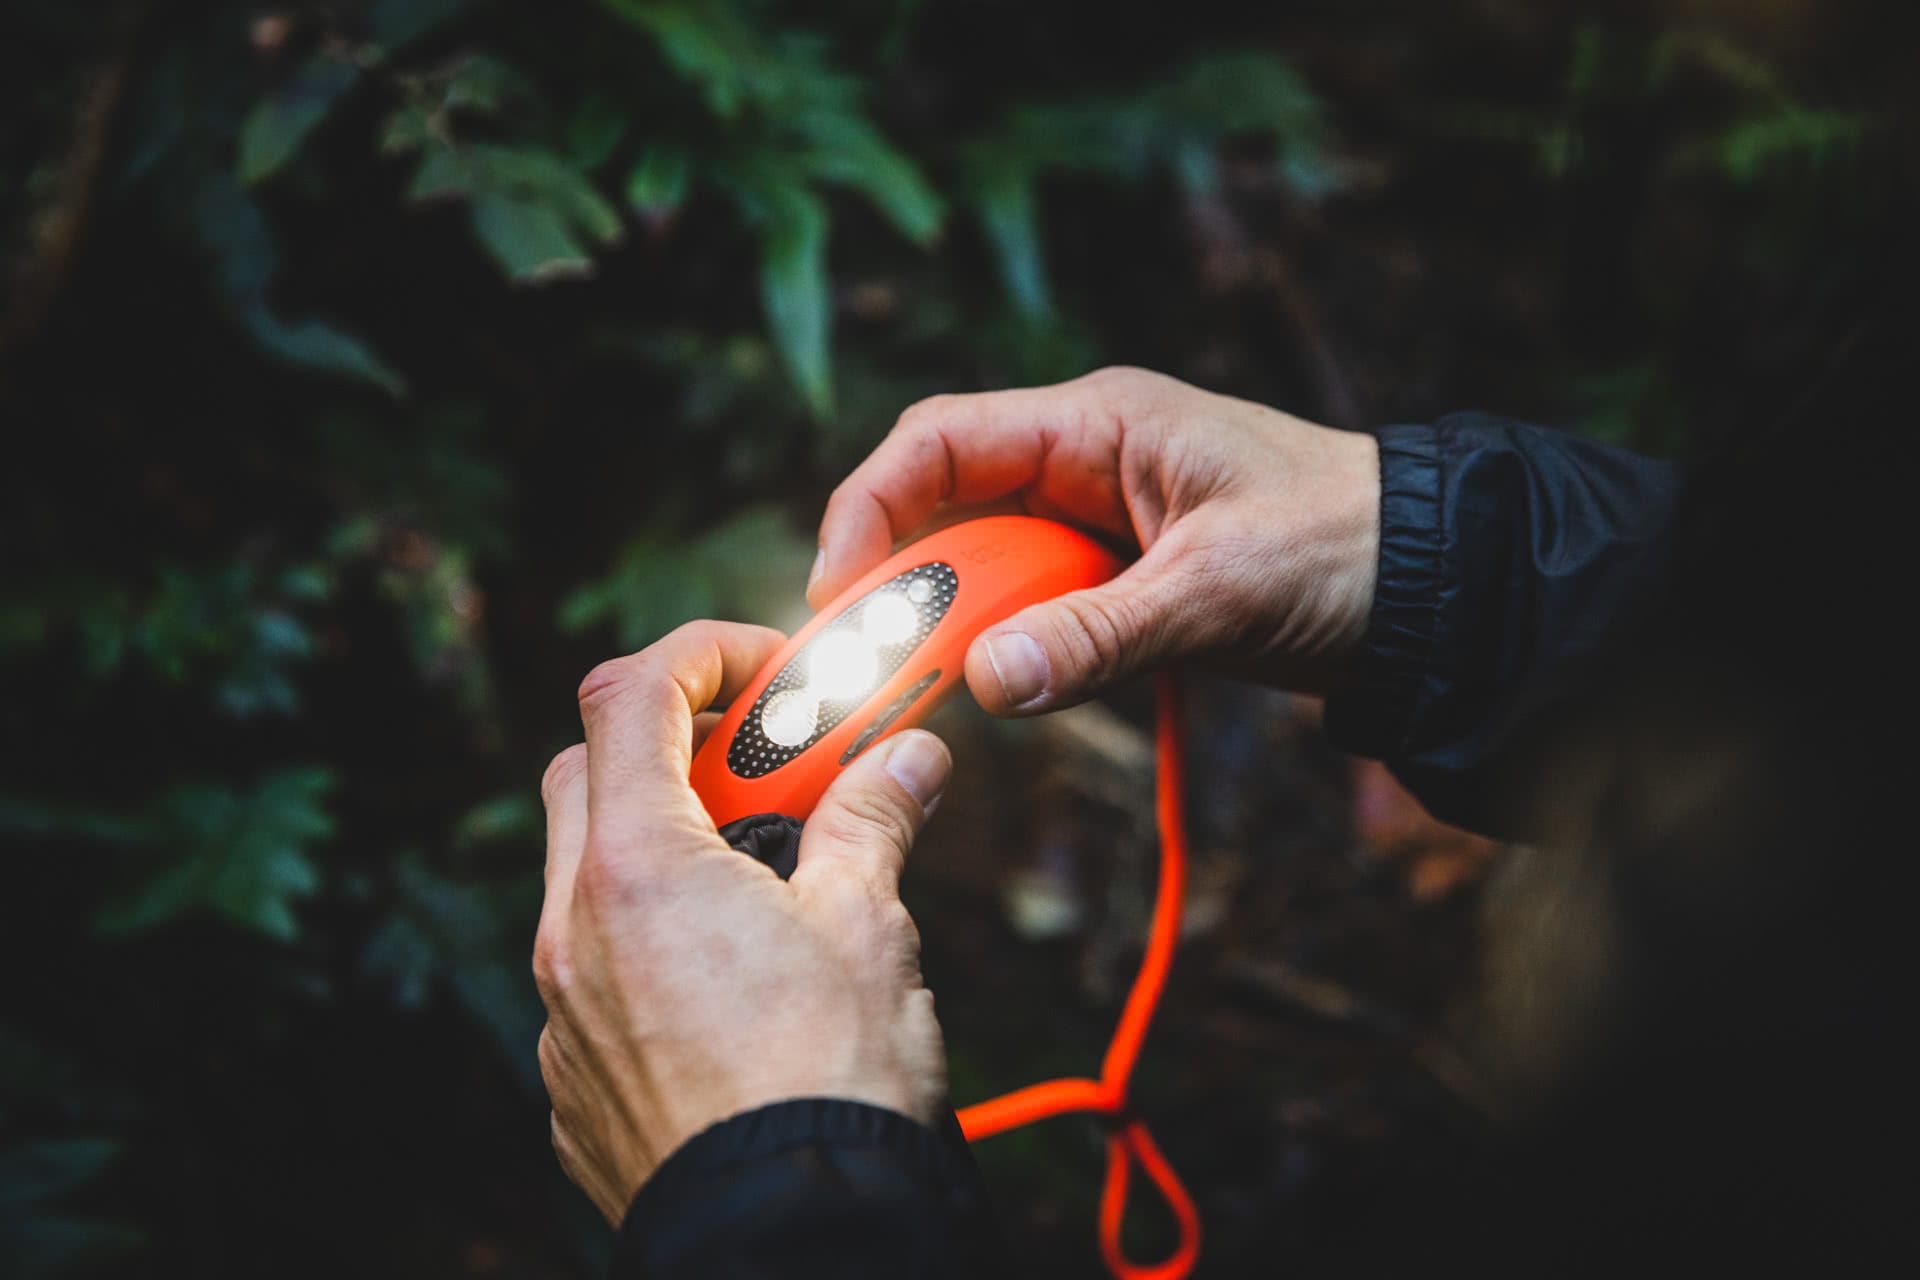 5 Adventures To Make Life Unboring, knog, photo by guy wilmot, empress canyon, blue mountains, nsw, bilby headlamp, light, torch